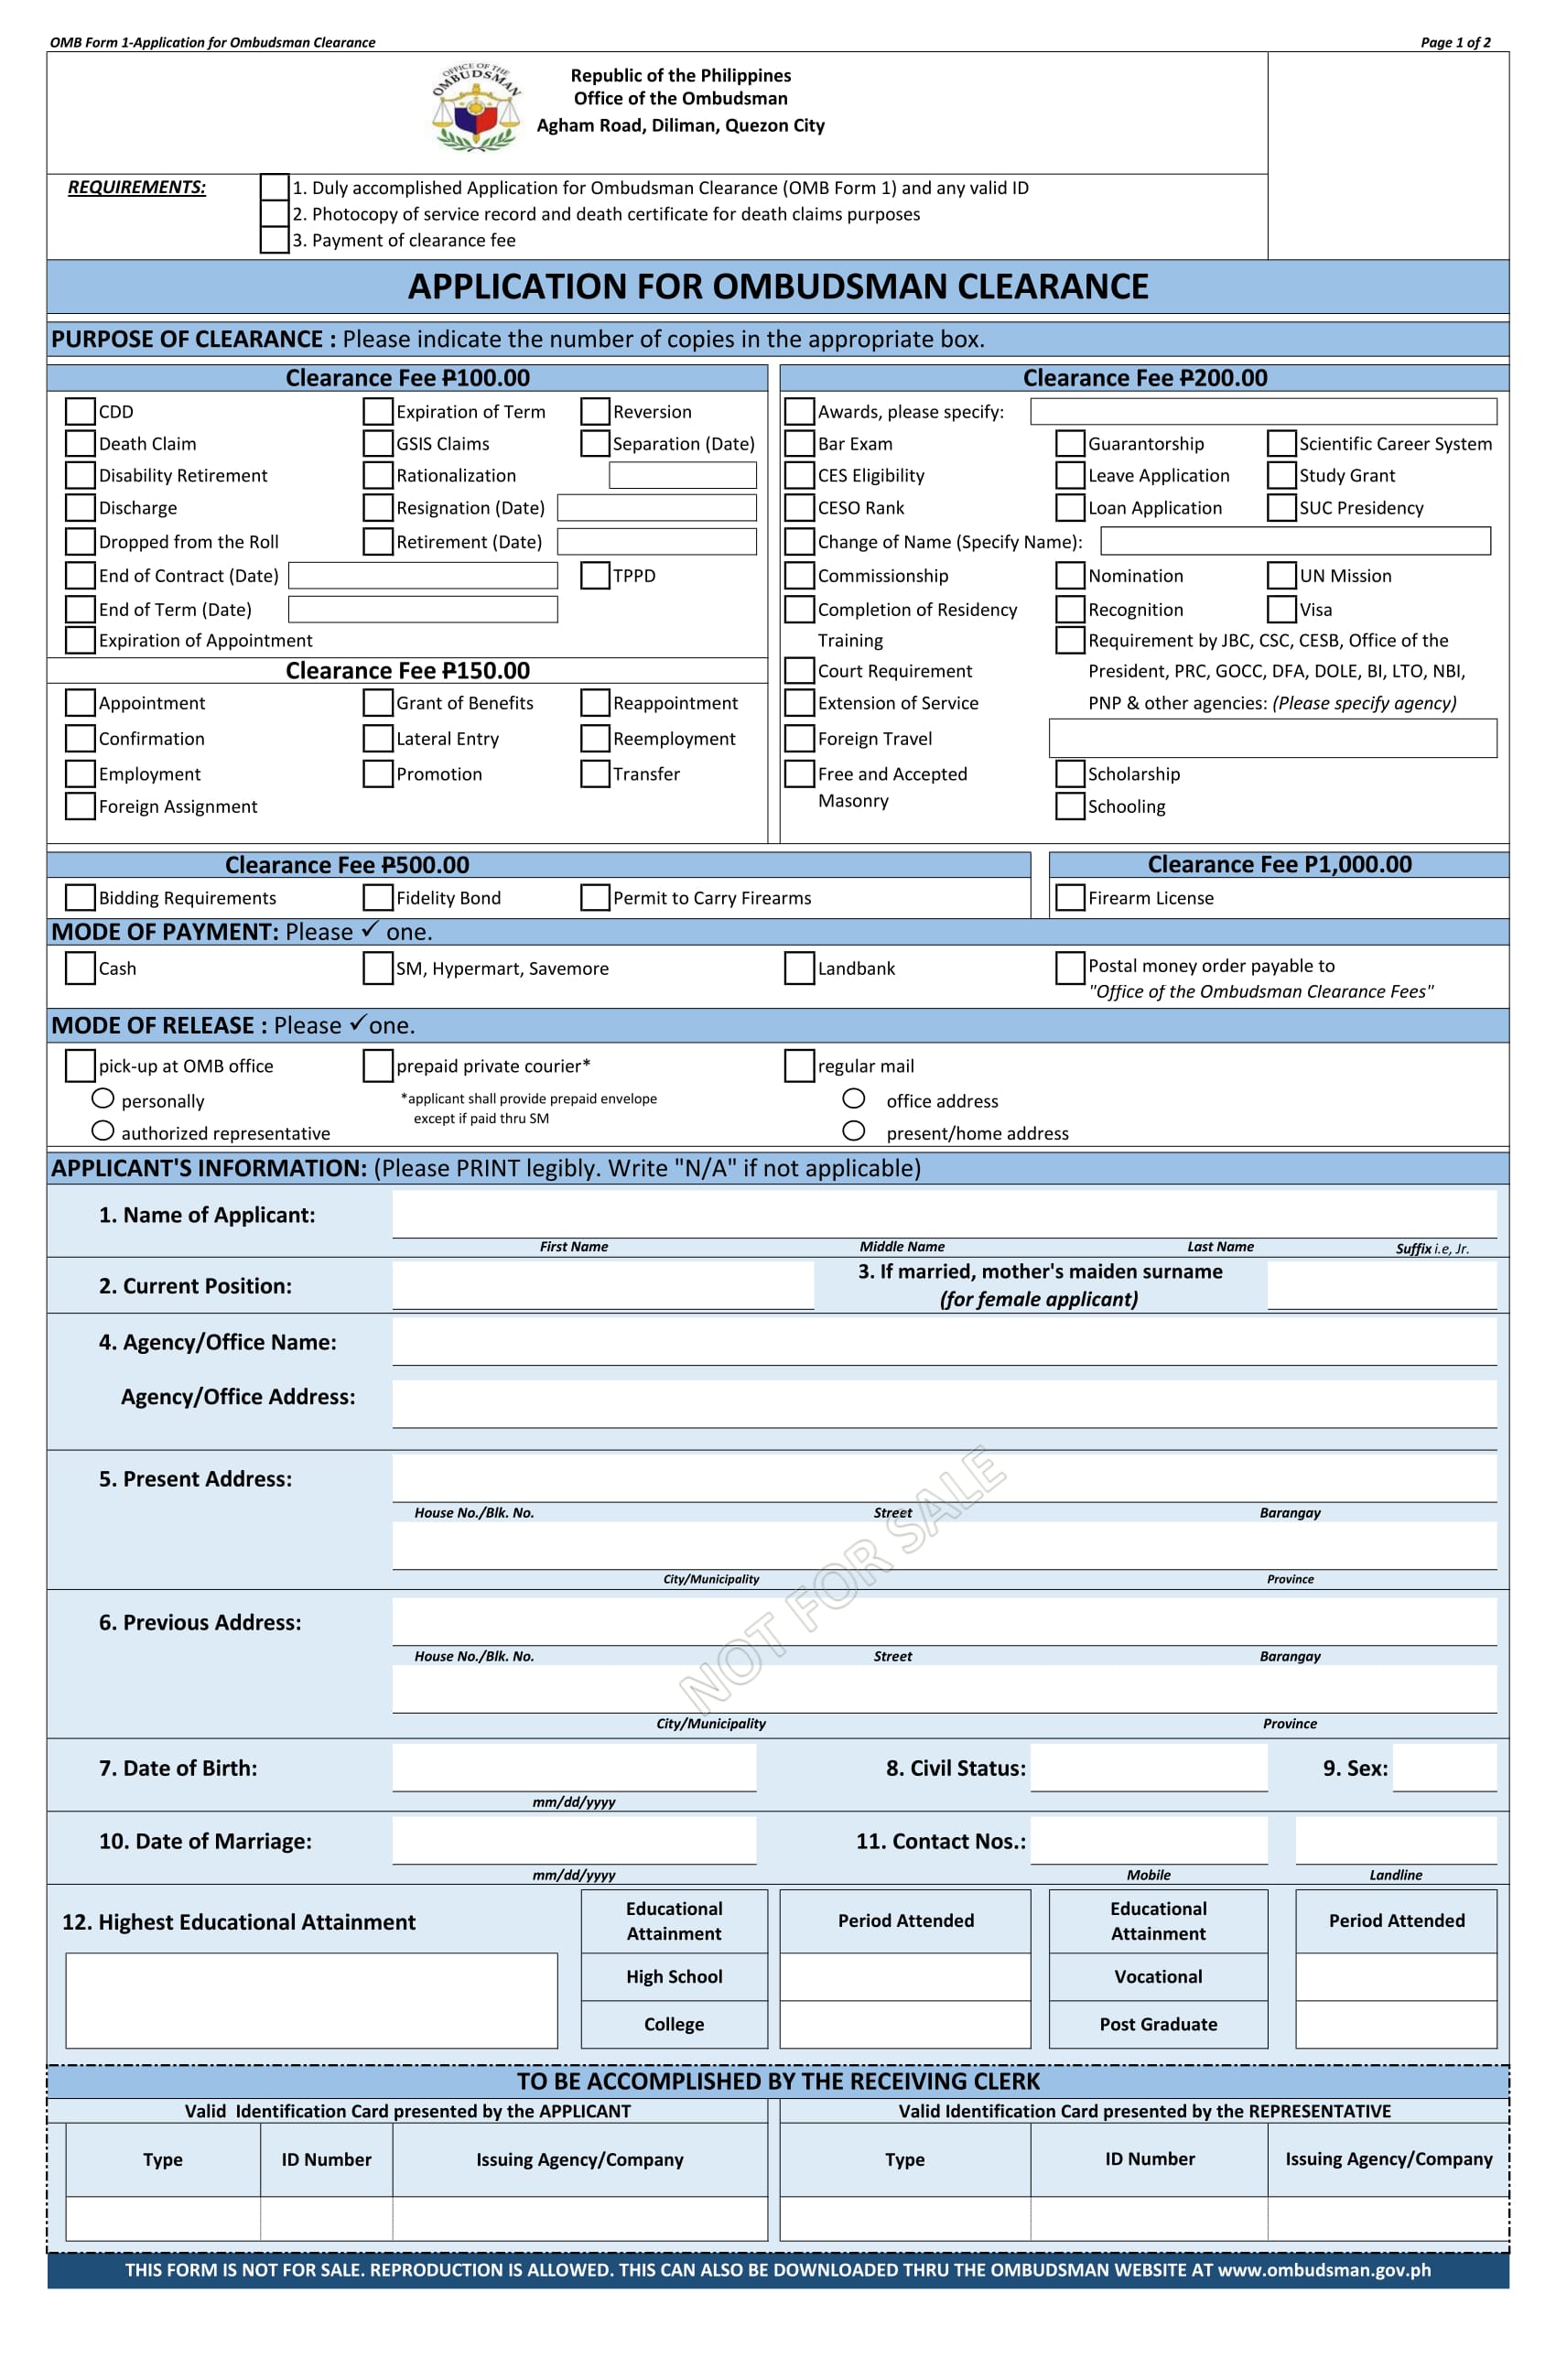 ombudsman clearance application form 1